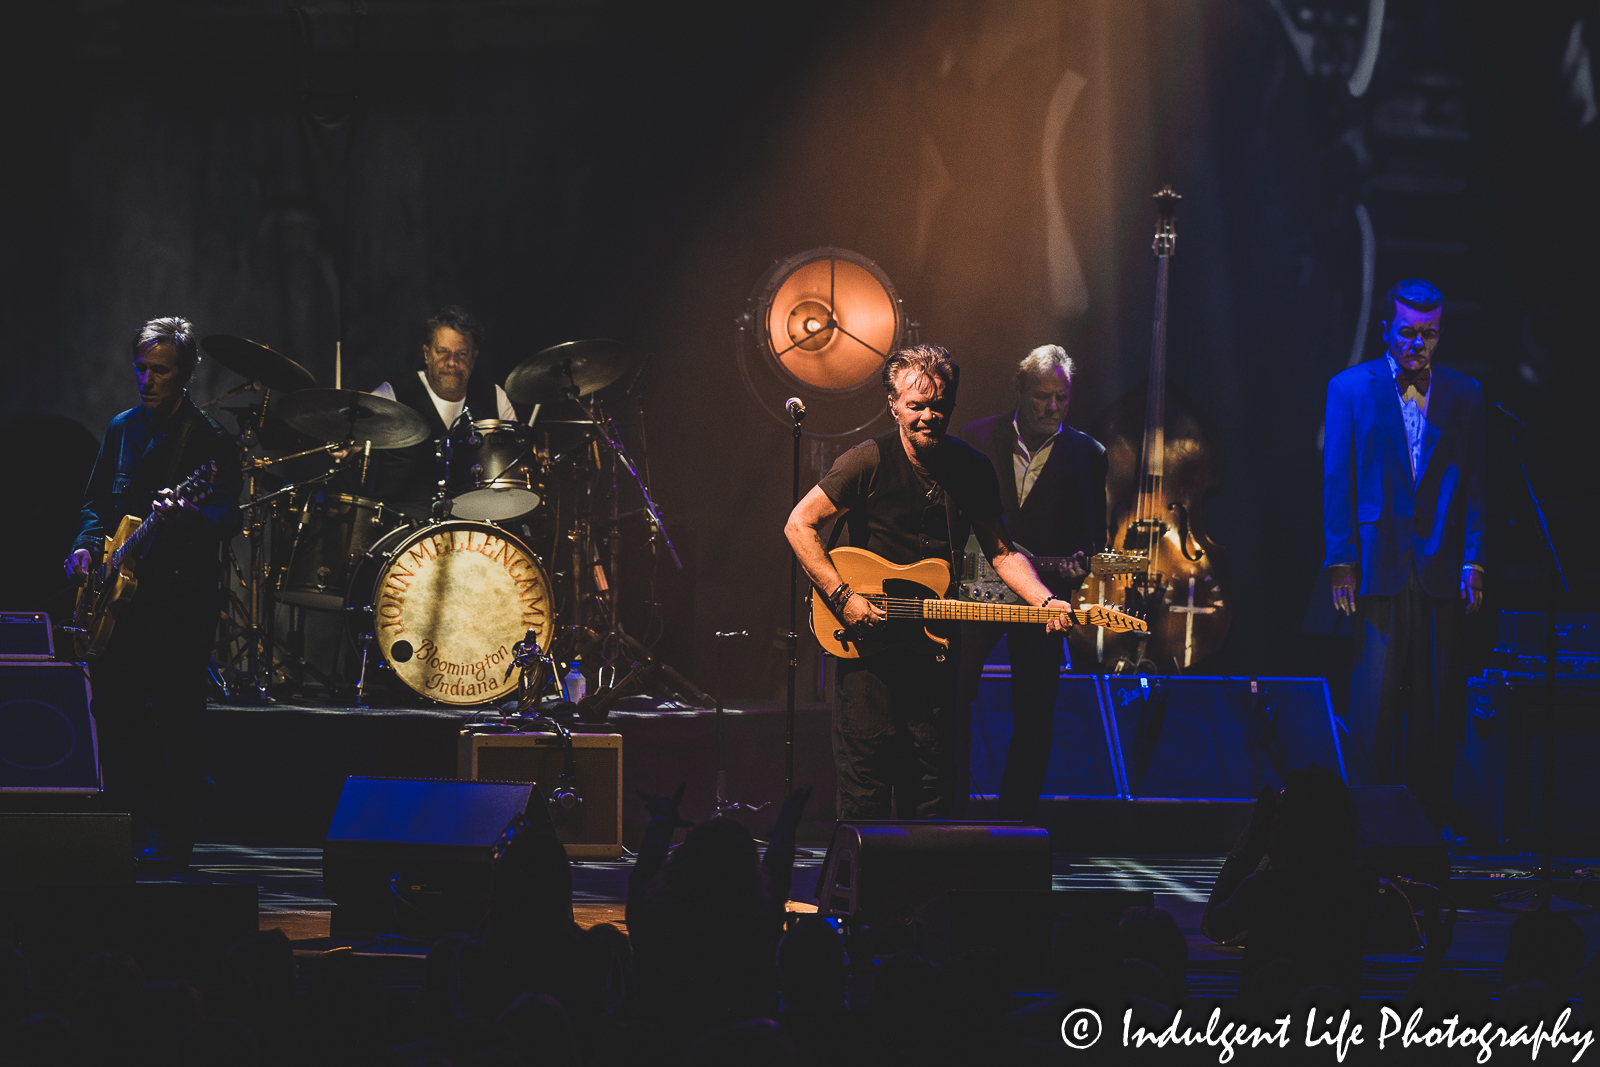 John Mellencamp performing live with guitarist Andy York, drummer Andy Clark and guitarist Mike Wachic at The Midland Theatre in downtown Kansas City, MO on April 4, 2023.